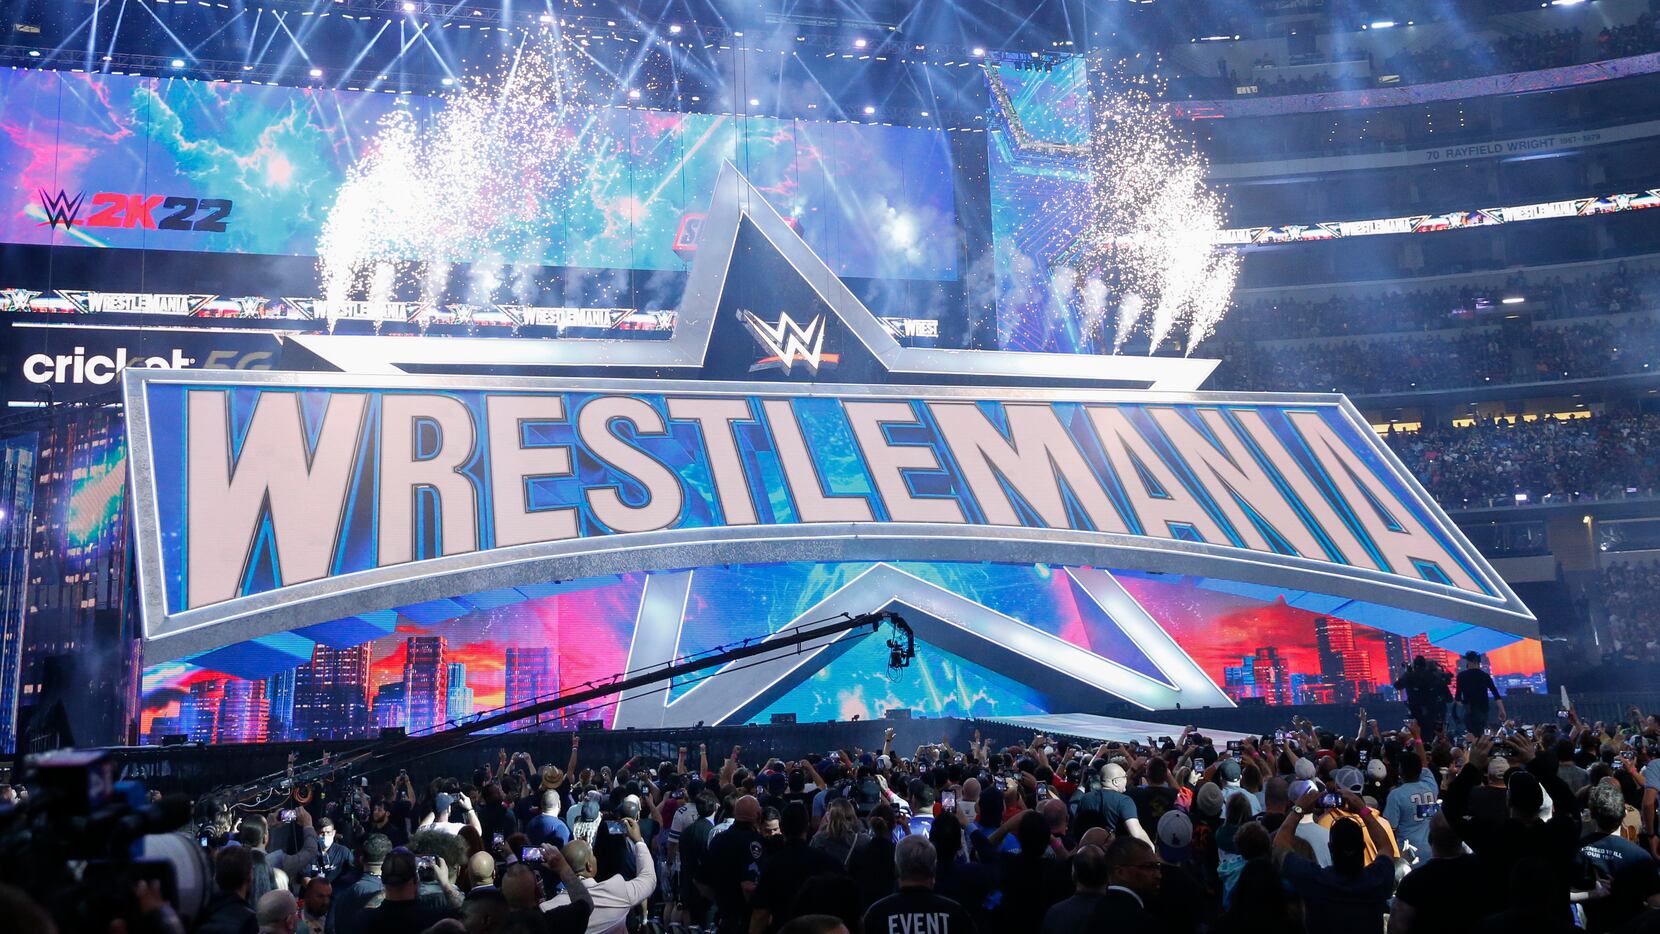 WrestleMania 38 hosts record crowds at AT&T Stadium to become most